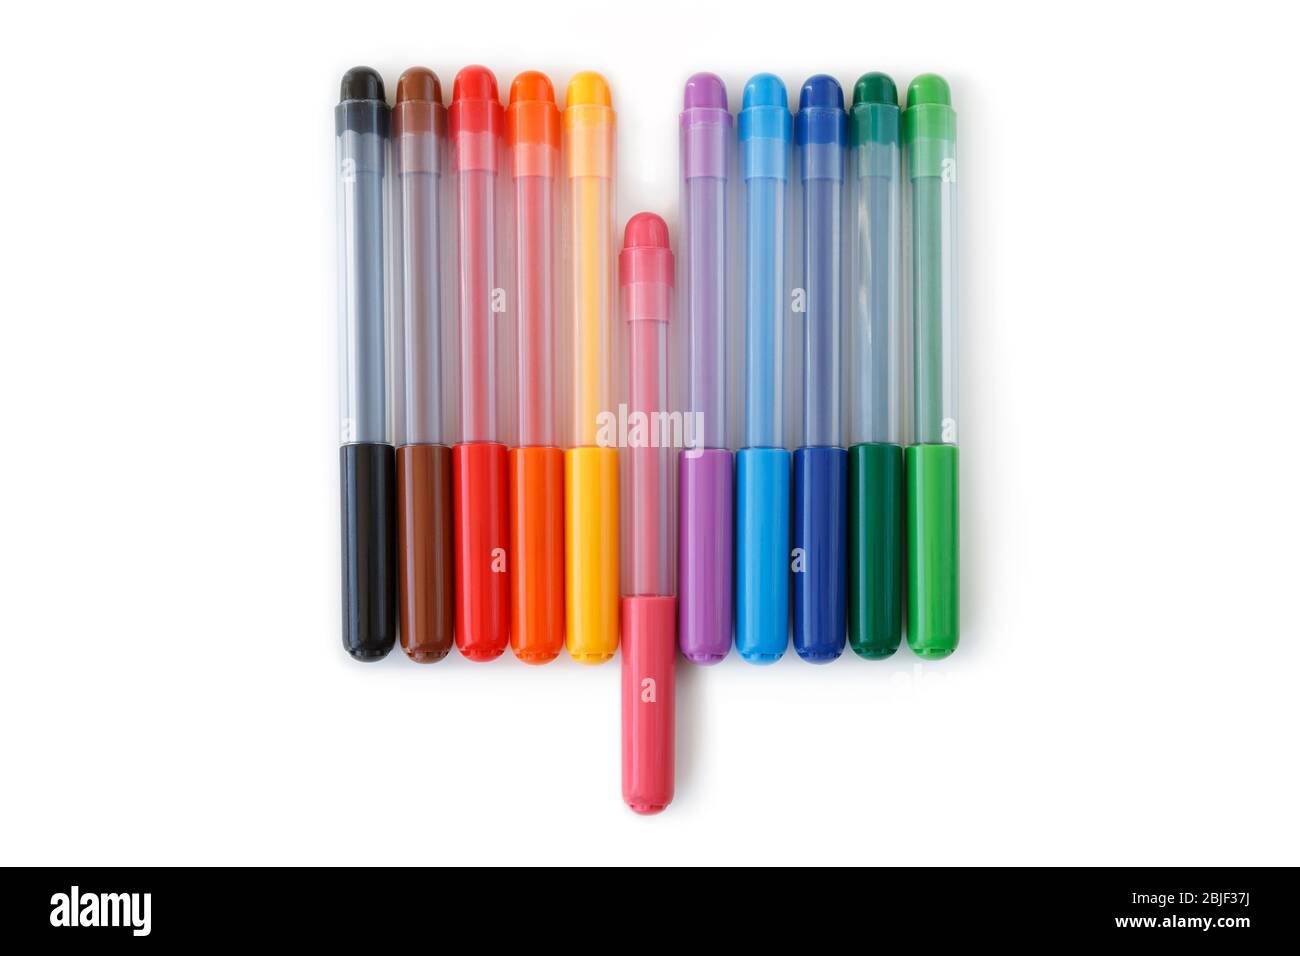 123+ Thousand Colorful Marker Pen Royalty-Free Images, Stock